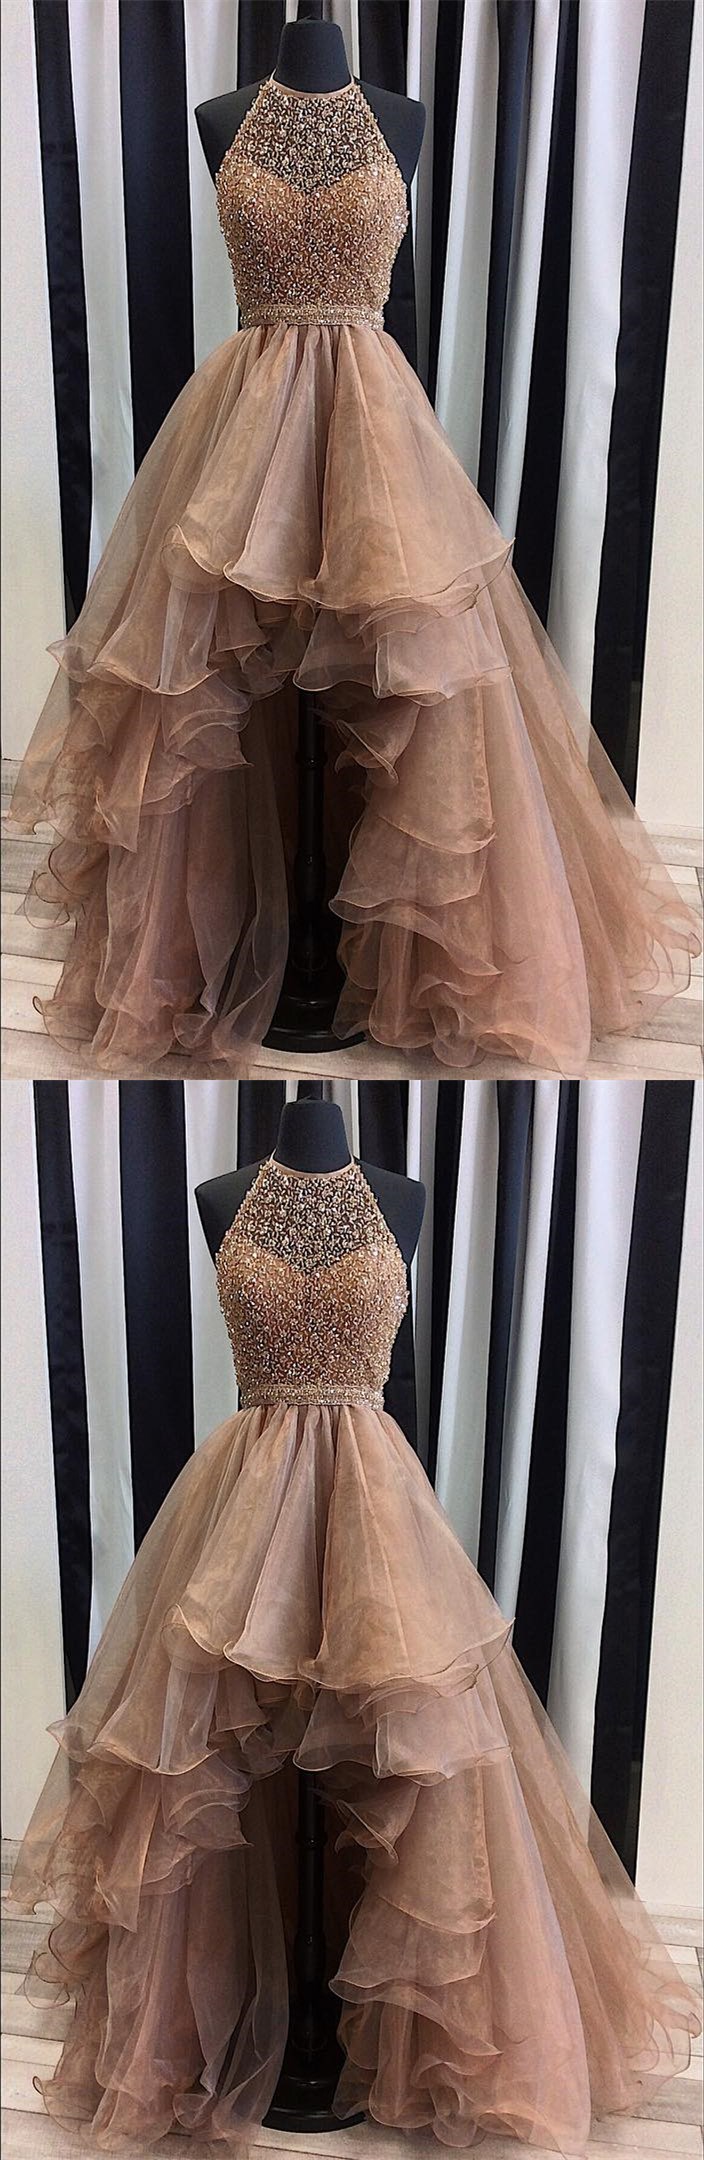 Sequins Beaded Prom Dress,organza Prom Dress,high Low Prom Dress,halter Prom Gowns,champagne Prom Dress,prom Dresses 2017